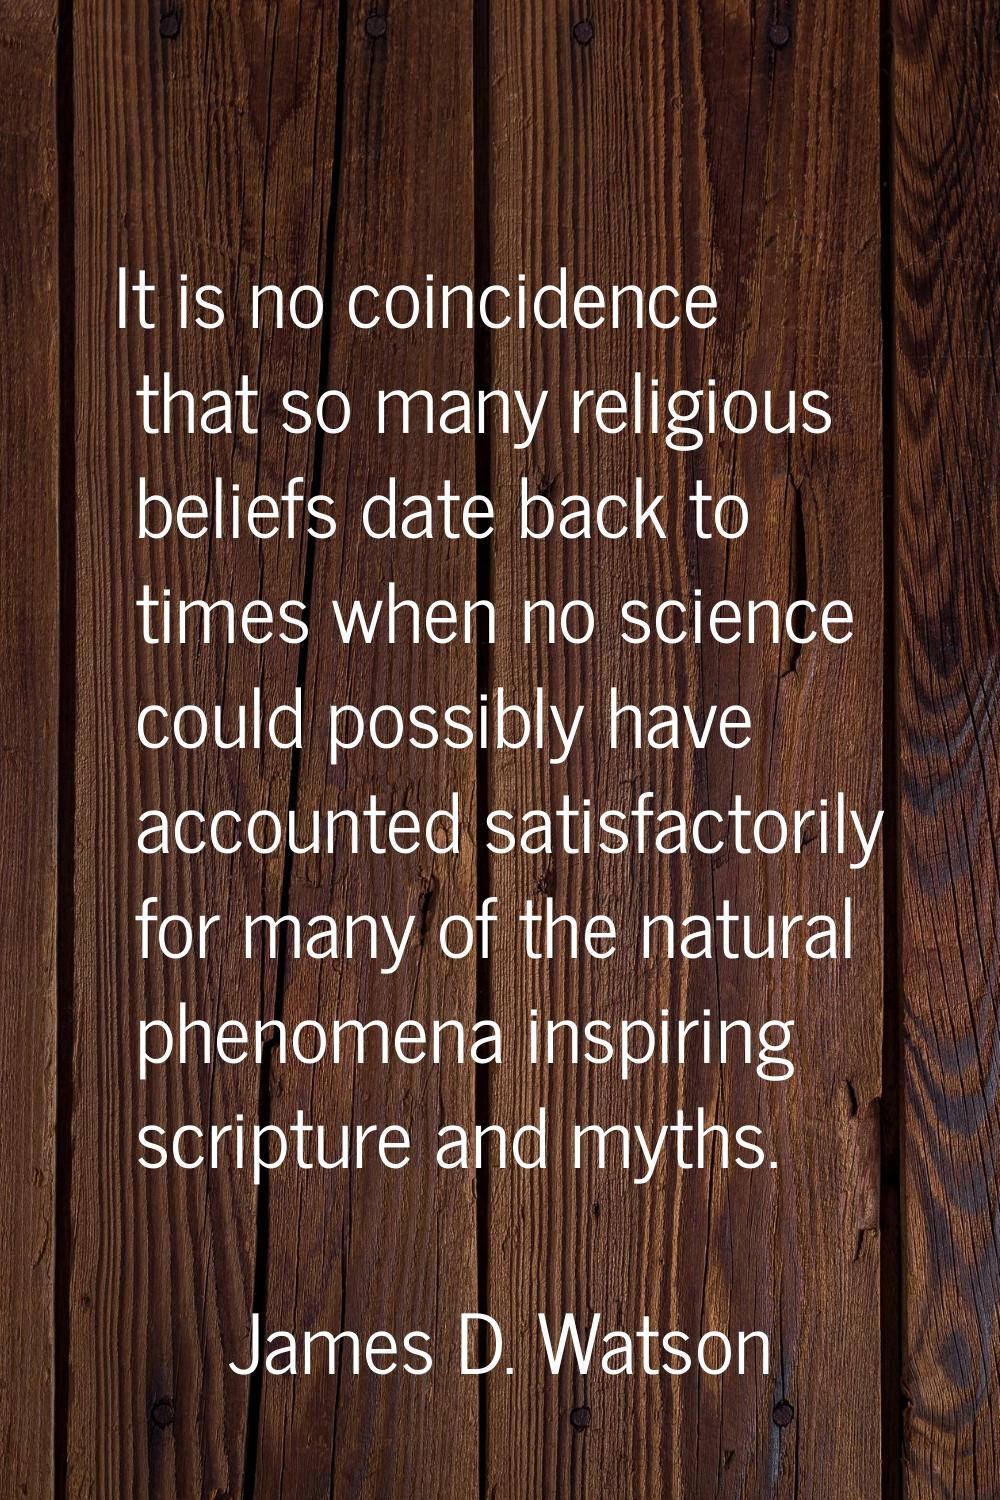 It is no coincidence that so many religious beliefs date back to times when no science could possib